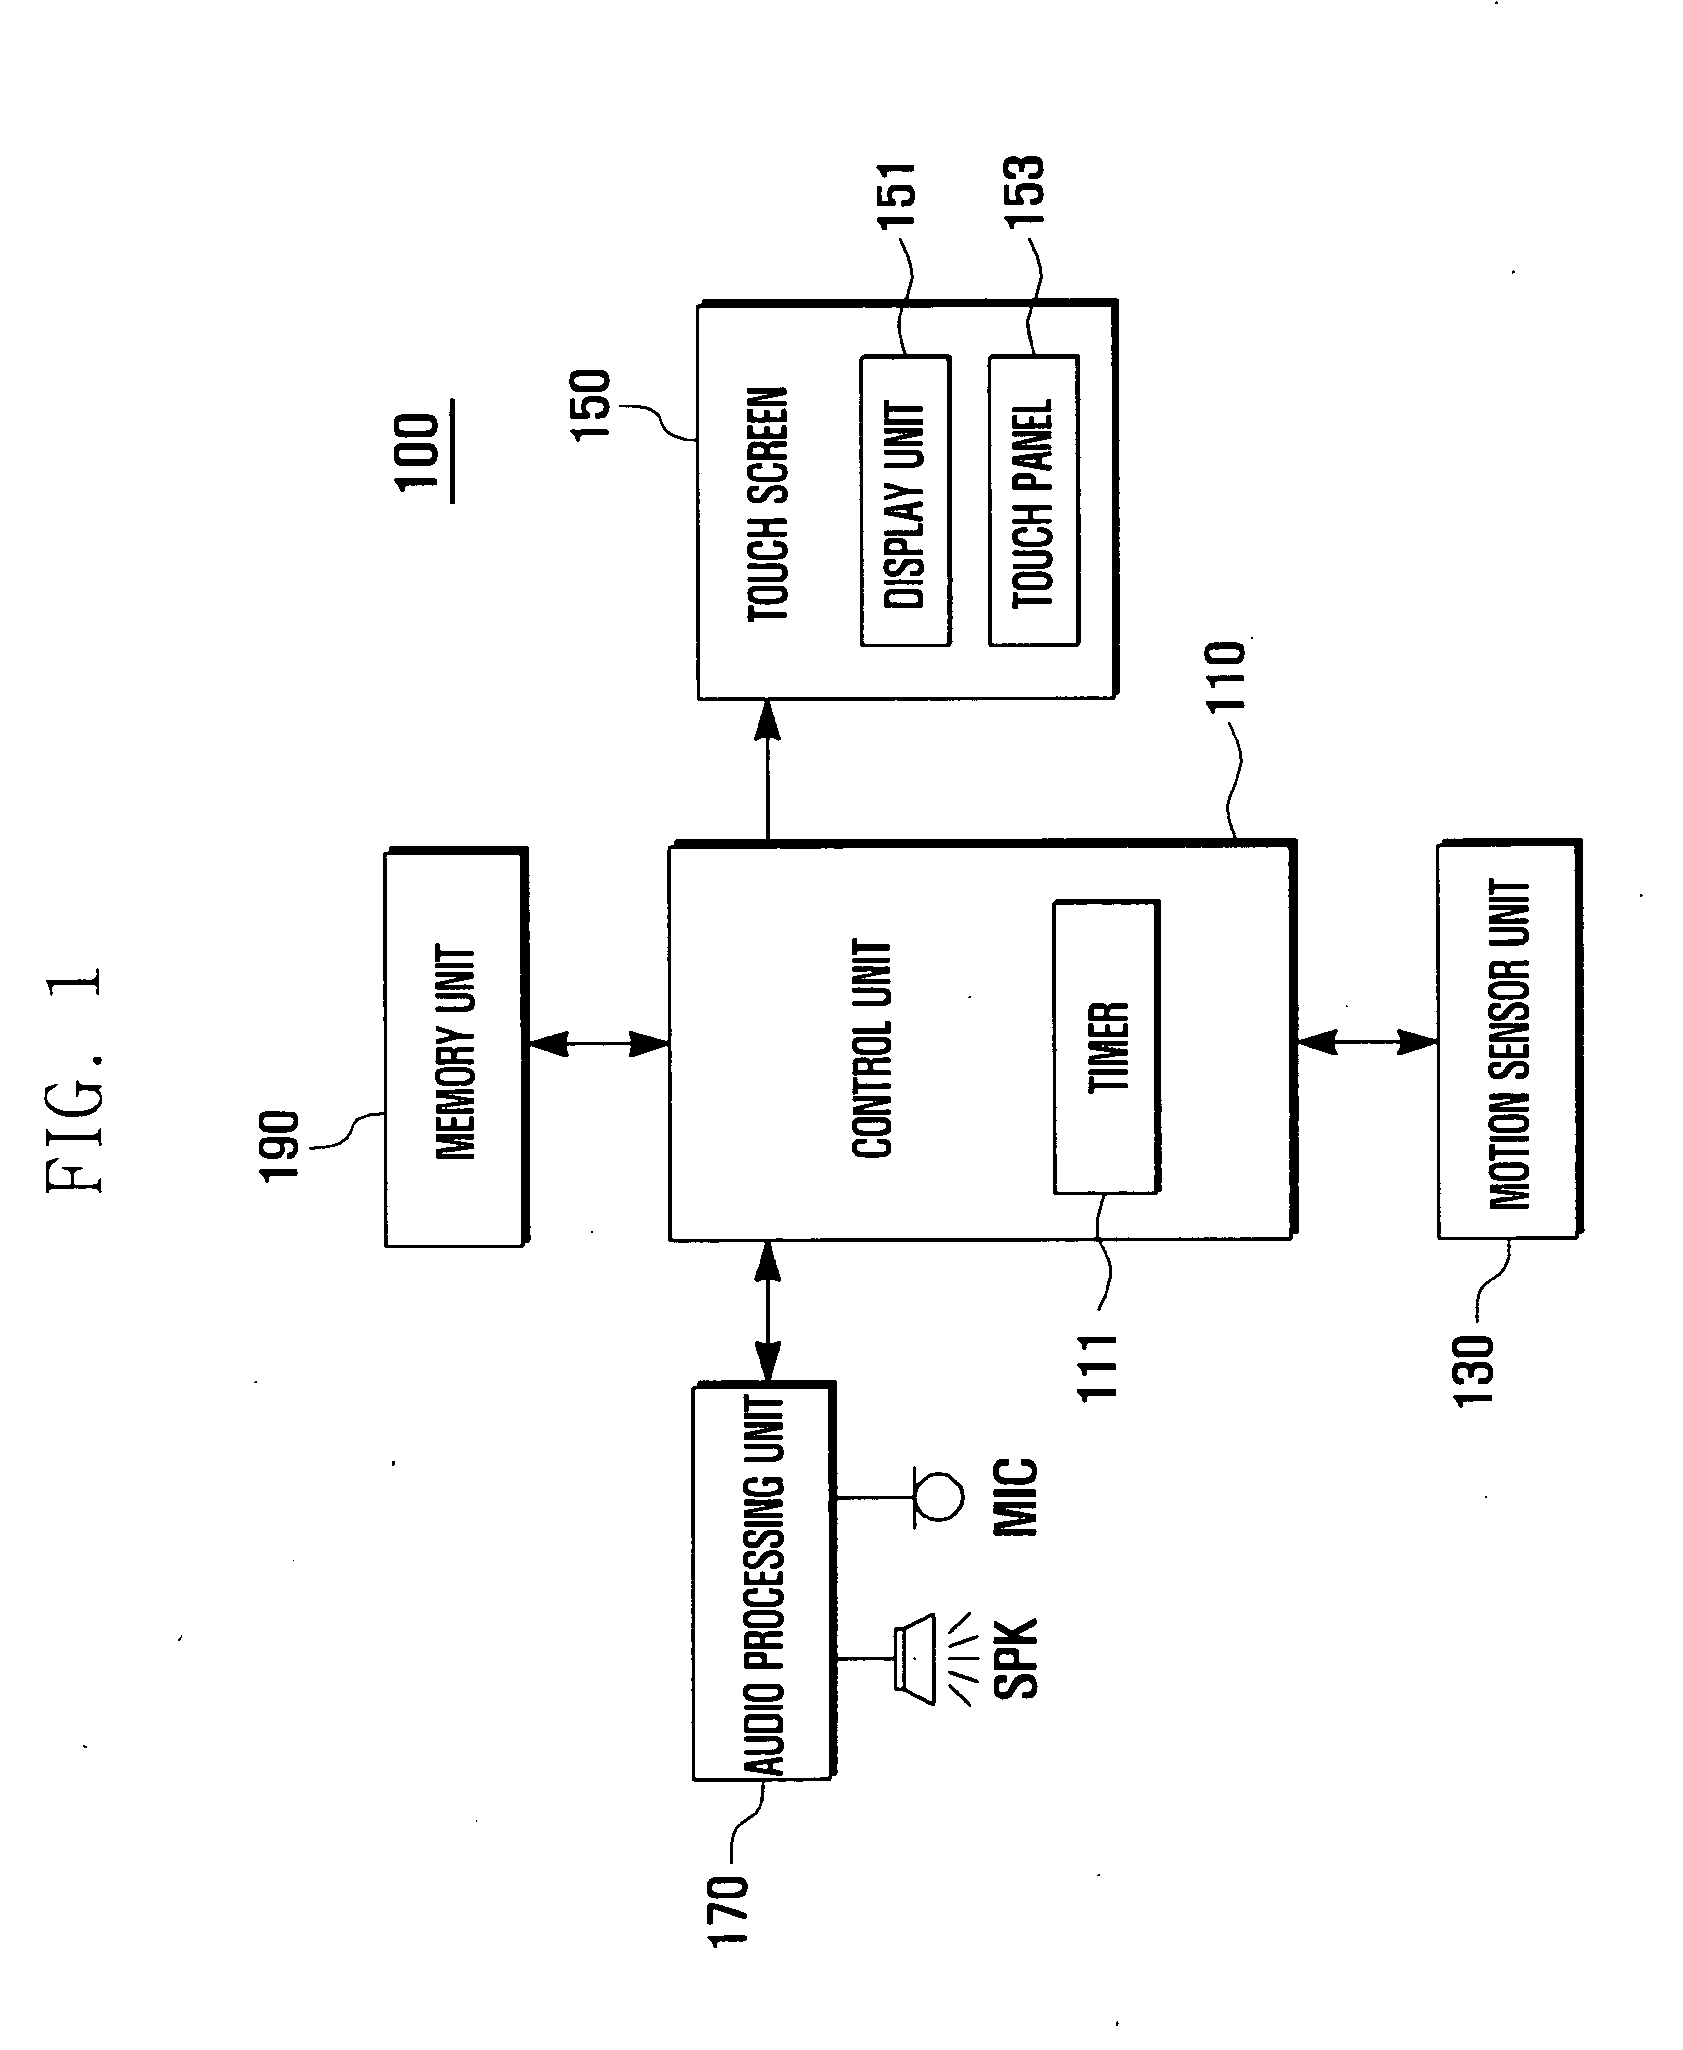 Mobile device and method for touch lock control based on motion sensing